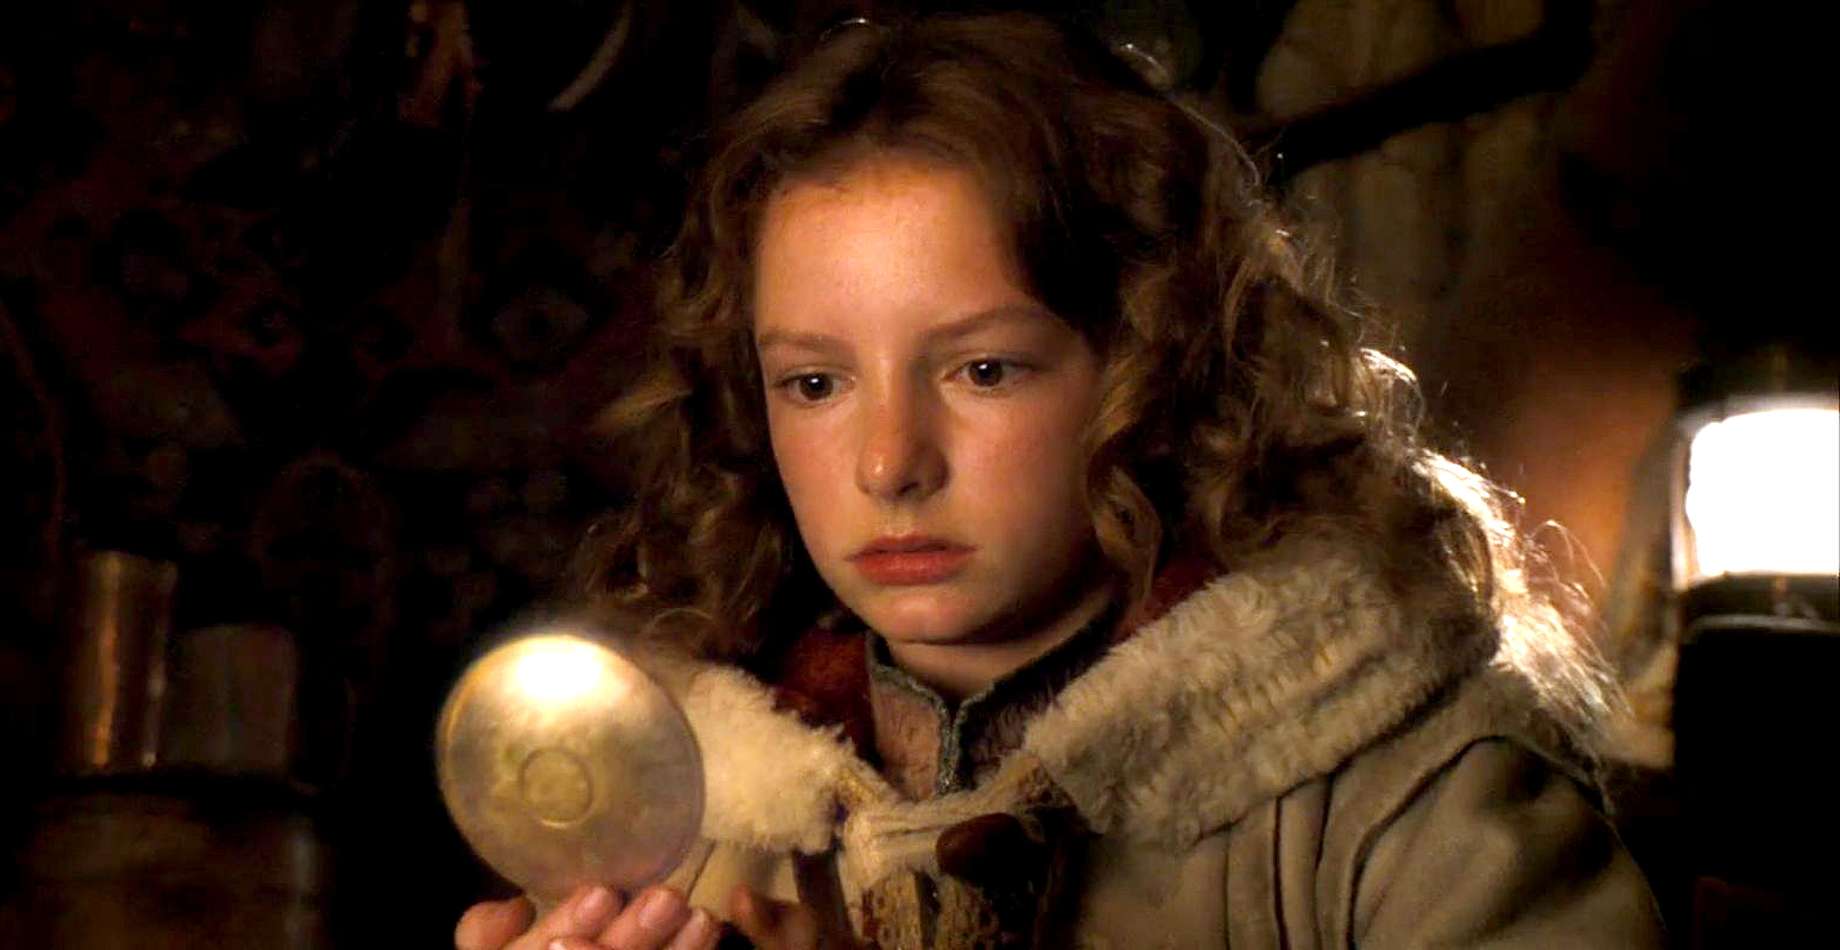 The Golden Compass Star Says Watching His Dark Materials Was ‘Exciting And Strange’